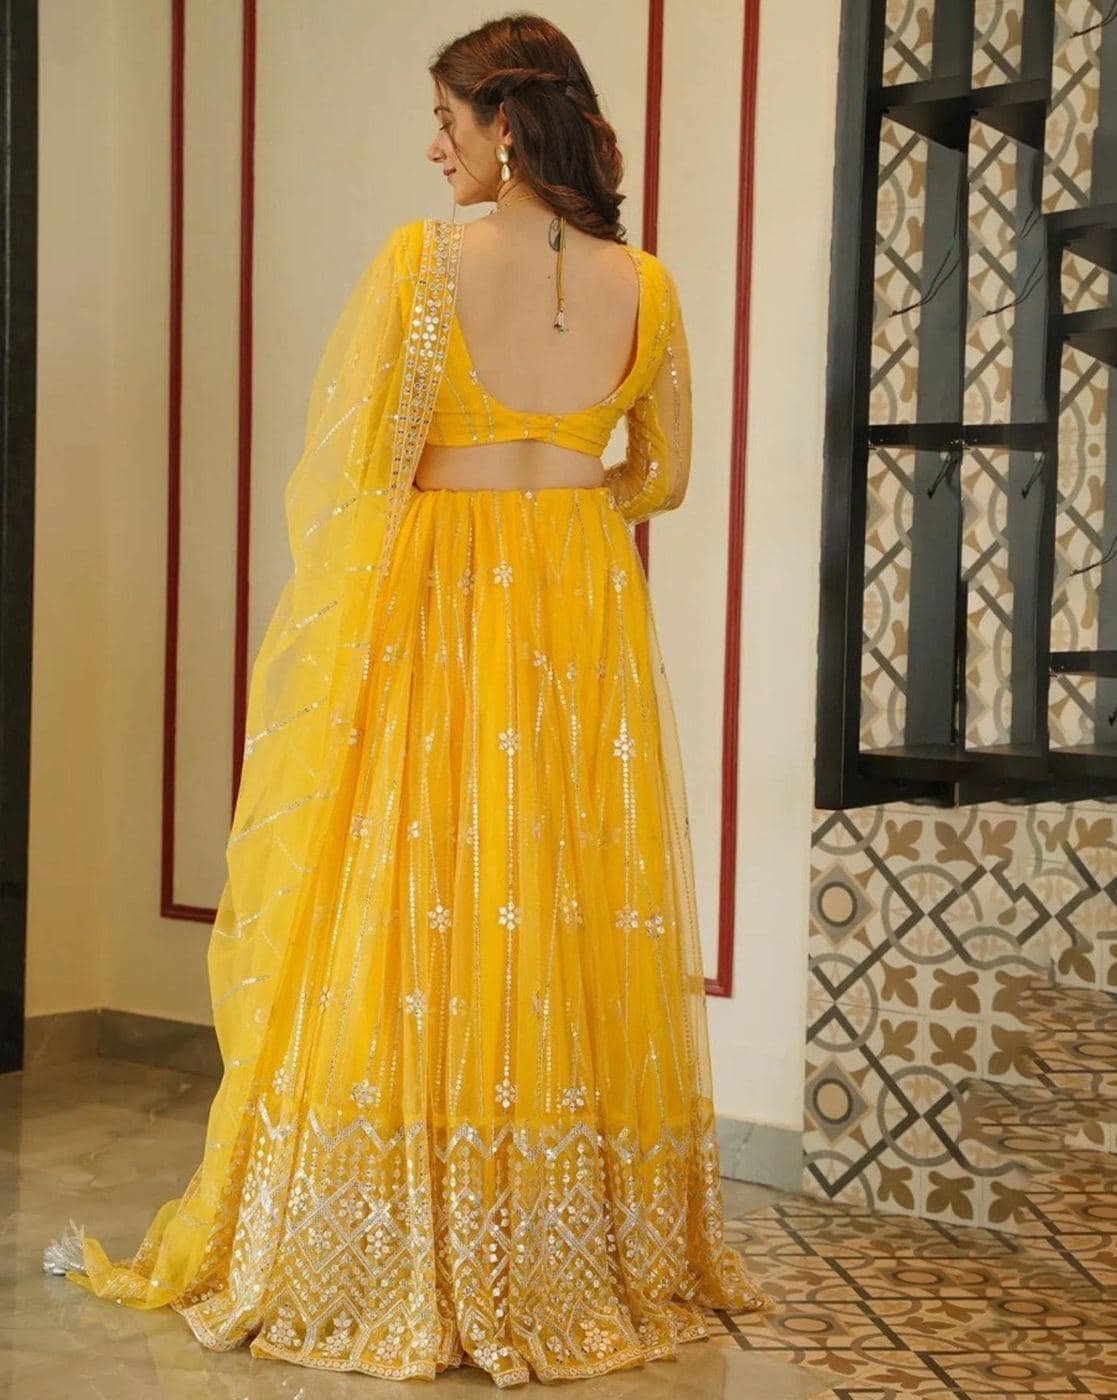 Haldi outfit images for wedding planning